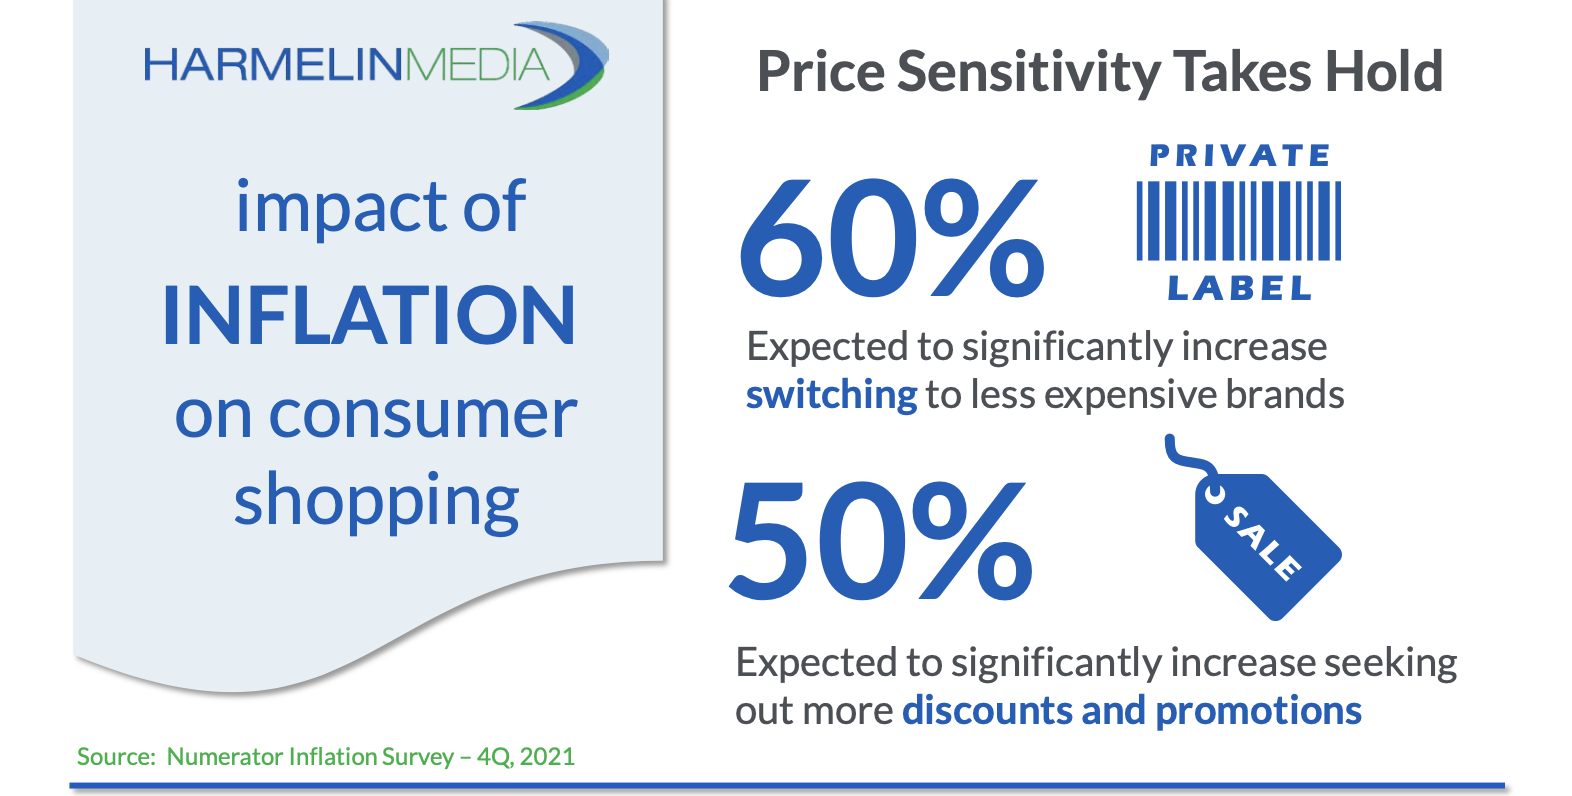 The impact of inflation on consumer shopping including the vulnerability of major categories and surging consumer trends like increased price sensitivity and at home dining.